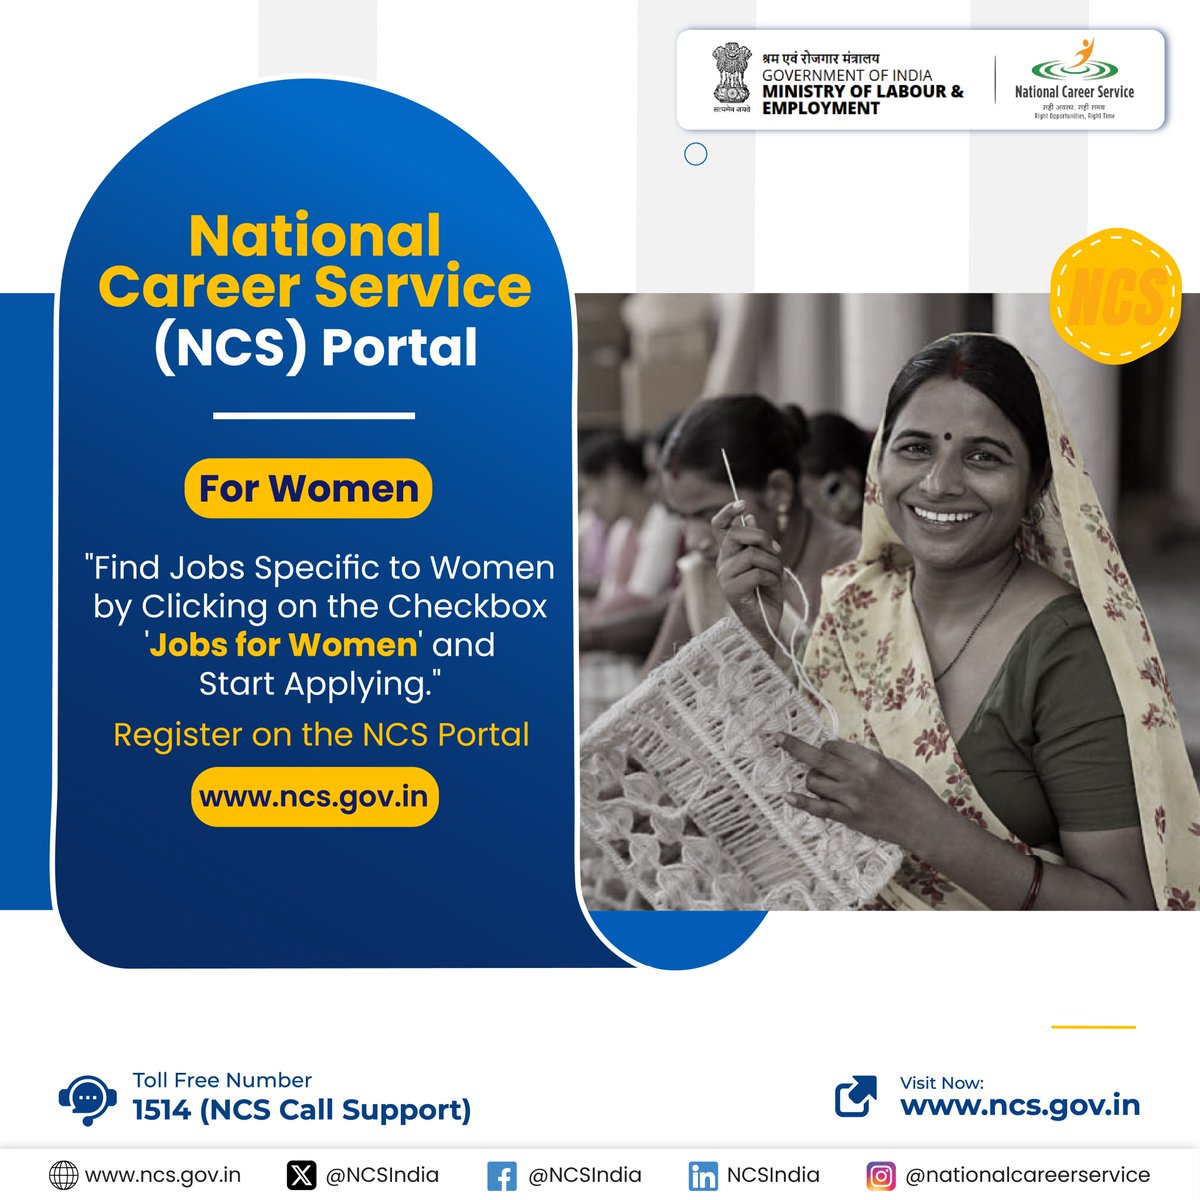 There is a separate checkbox for women job seekers to make it easy to find women-centric job options.

Register on ncs.gov.in portal to get updated information on jobs.

#NCSIndia #career #recruitmentjobs #womenempower #RegisterNow